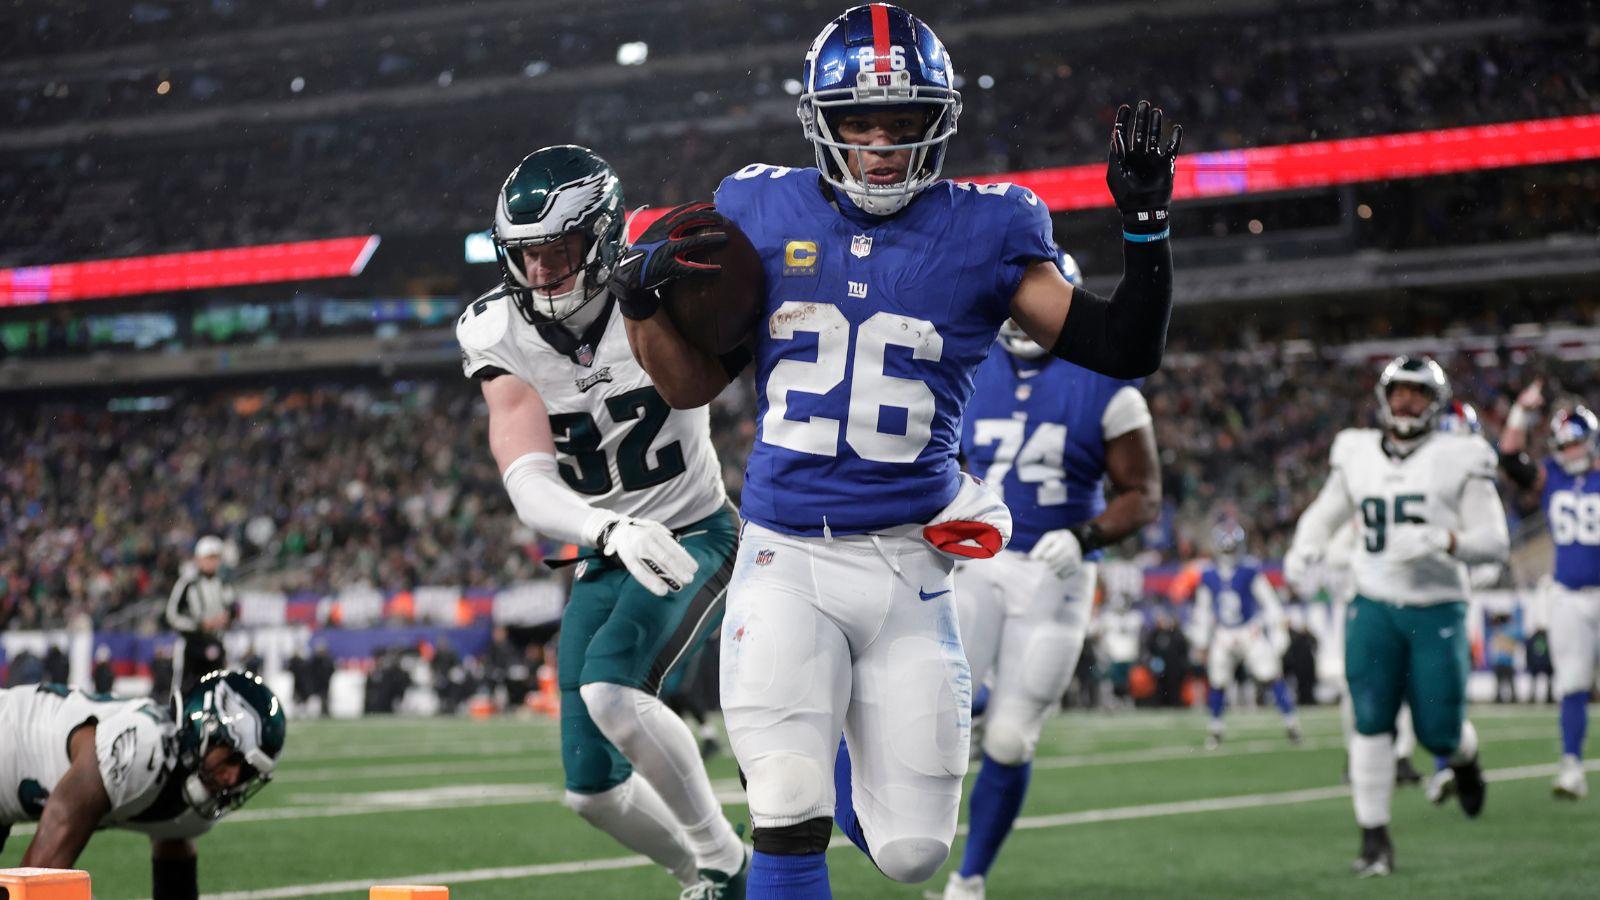 Saquon Barkley playing against the Philadelphia Eagles as a member of the New York Giants.